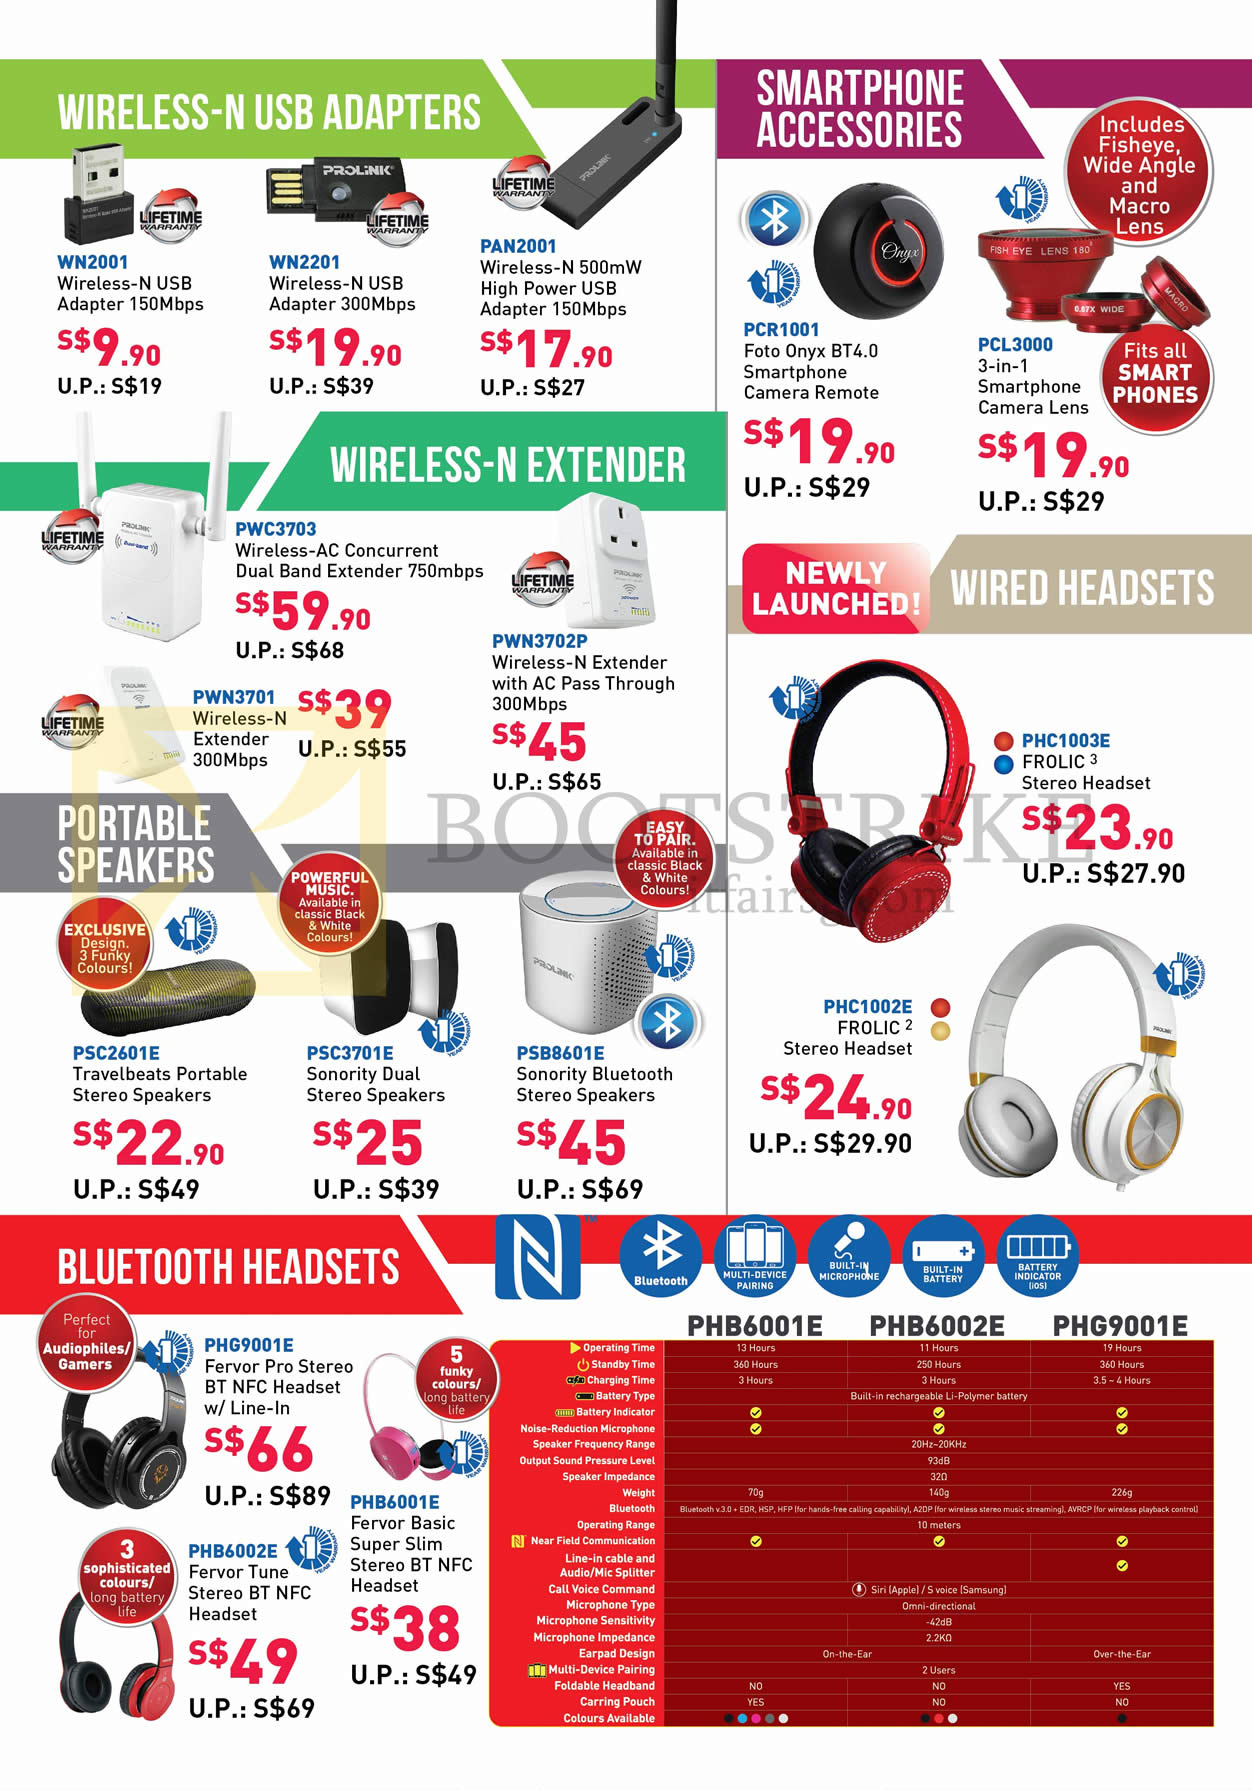 PC SHOW 2016 price list image brochure of Prolink Wireless N USB Adapters, Extender, Accessories, Headsets, Portable Speakers, Bluetooth Headsets, WN2001, 2201, PWC3703, PSC2601E, 3701E, PSB6001E, PHC1003E, 1002E